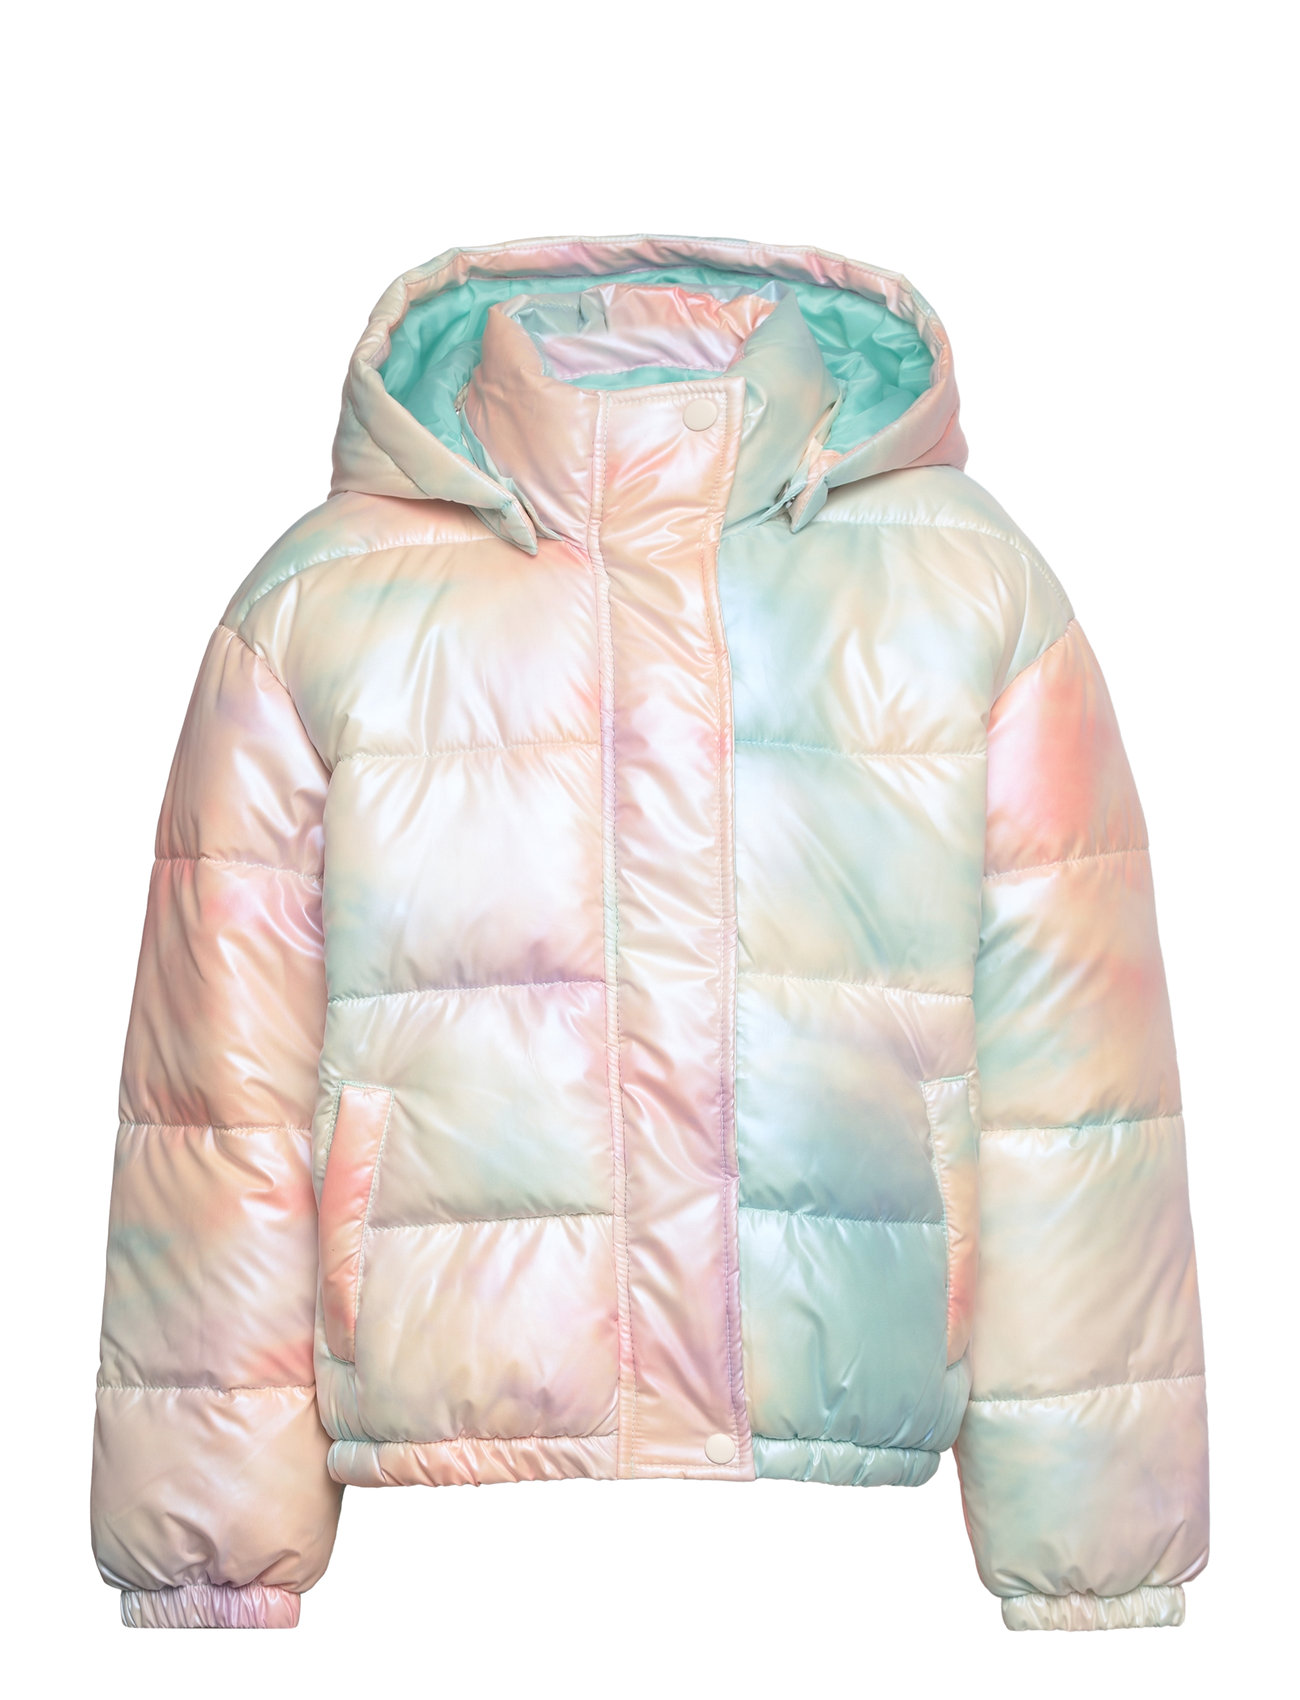 €. returns it Puffer and Nkfmash it delivery Jacket at Boozt.com. easy 31.50 & online name Fast - Buy Padded name Puffer from